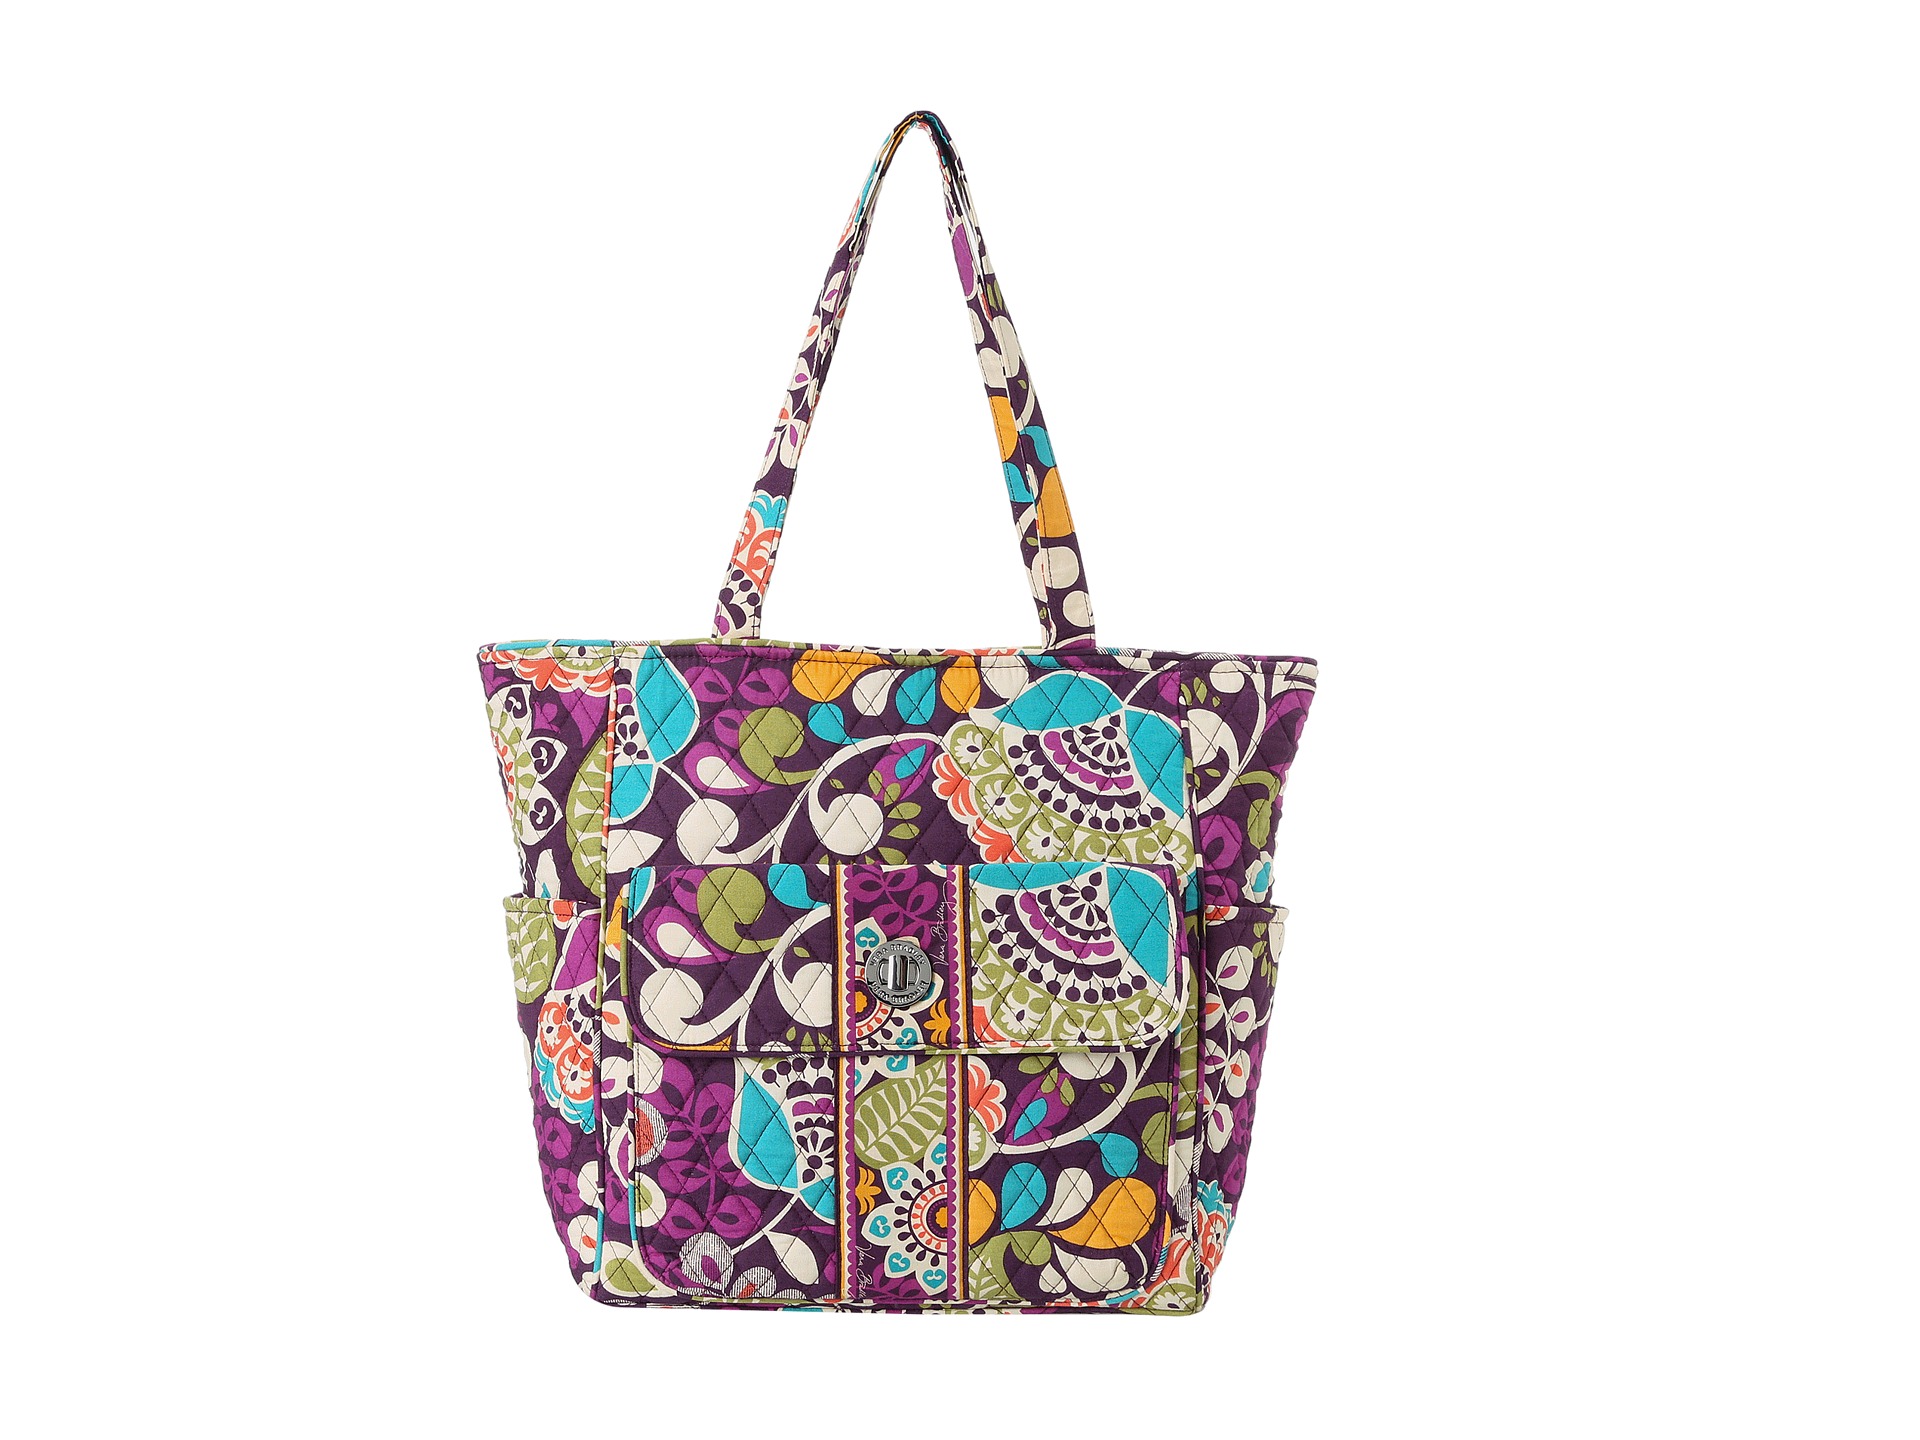 Vera Bradley Tablet Tote Plum Crazy | Shipped Free at Zappos